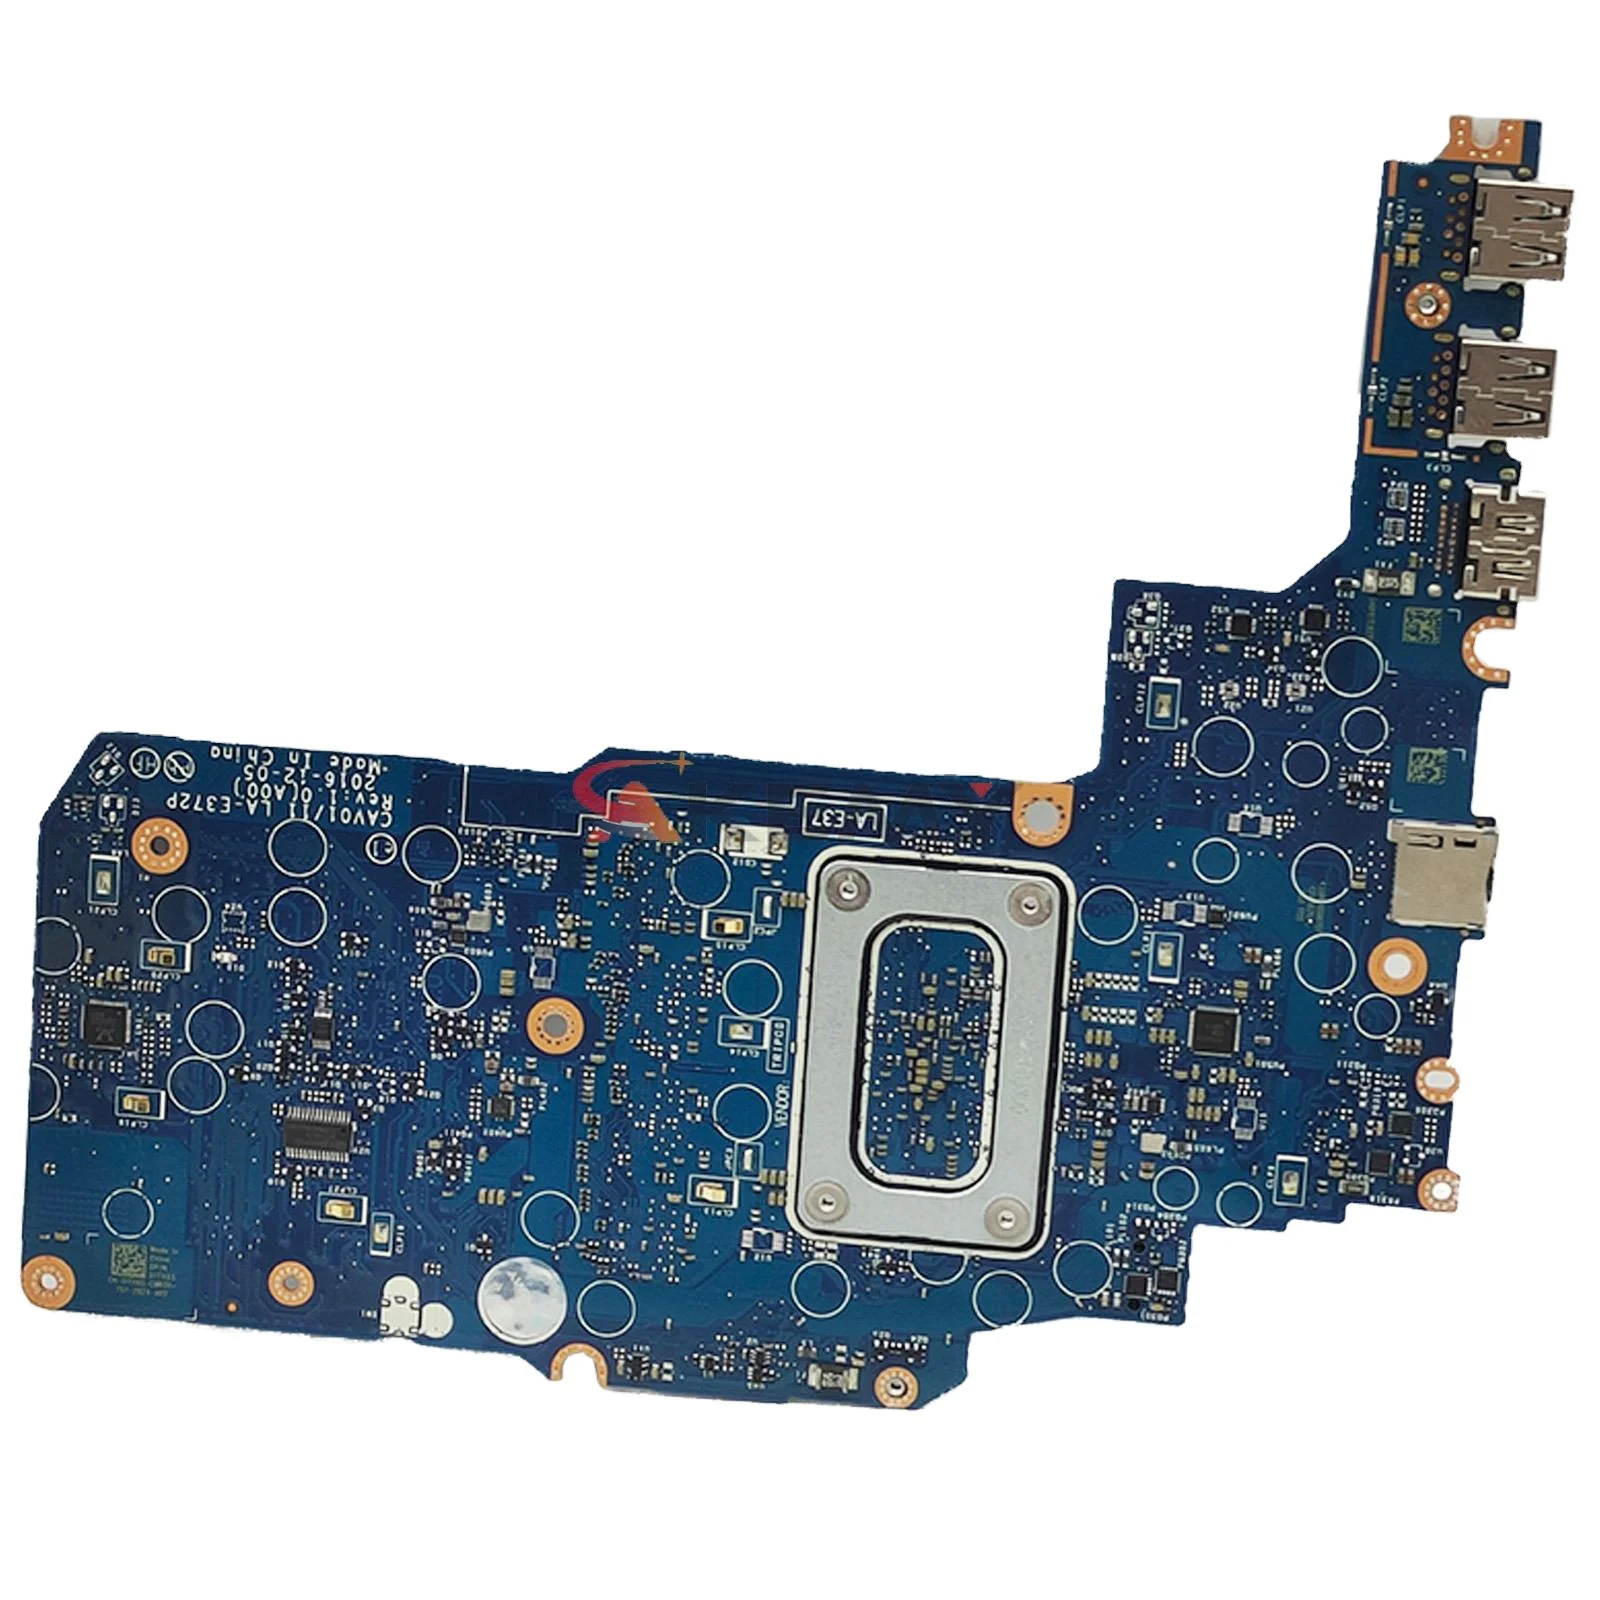 

Mainboard For DELL Inspiron 3189 Celeron N3060 Laptop motherboard CN-06V9N5 06V9N5 LA-E372P 06V9N5 N3060 4GB RAM Tested OK